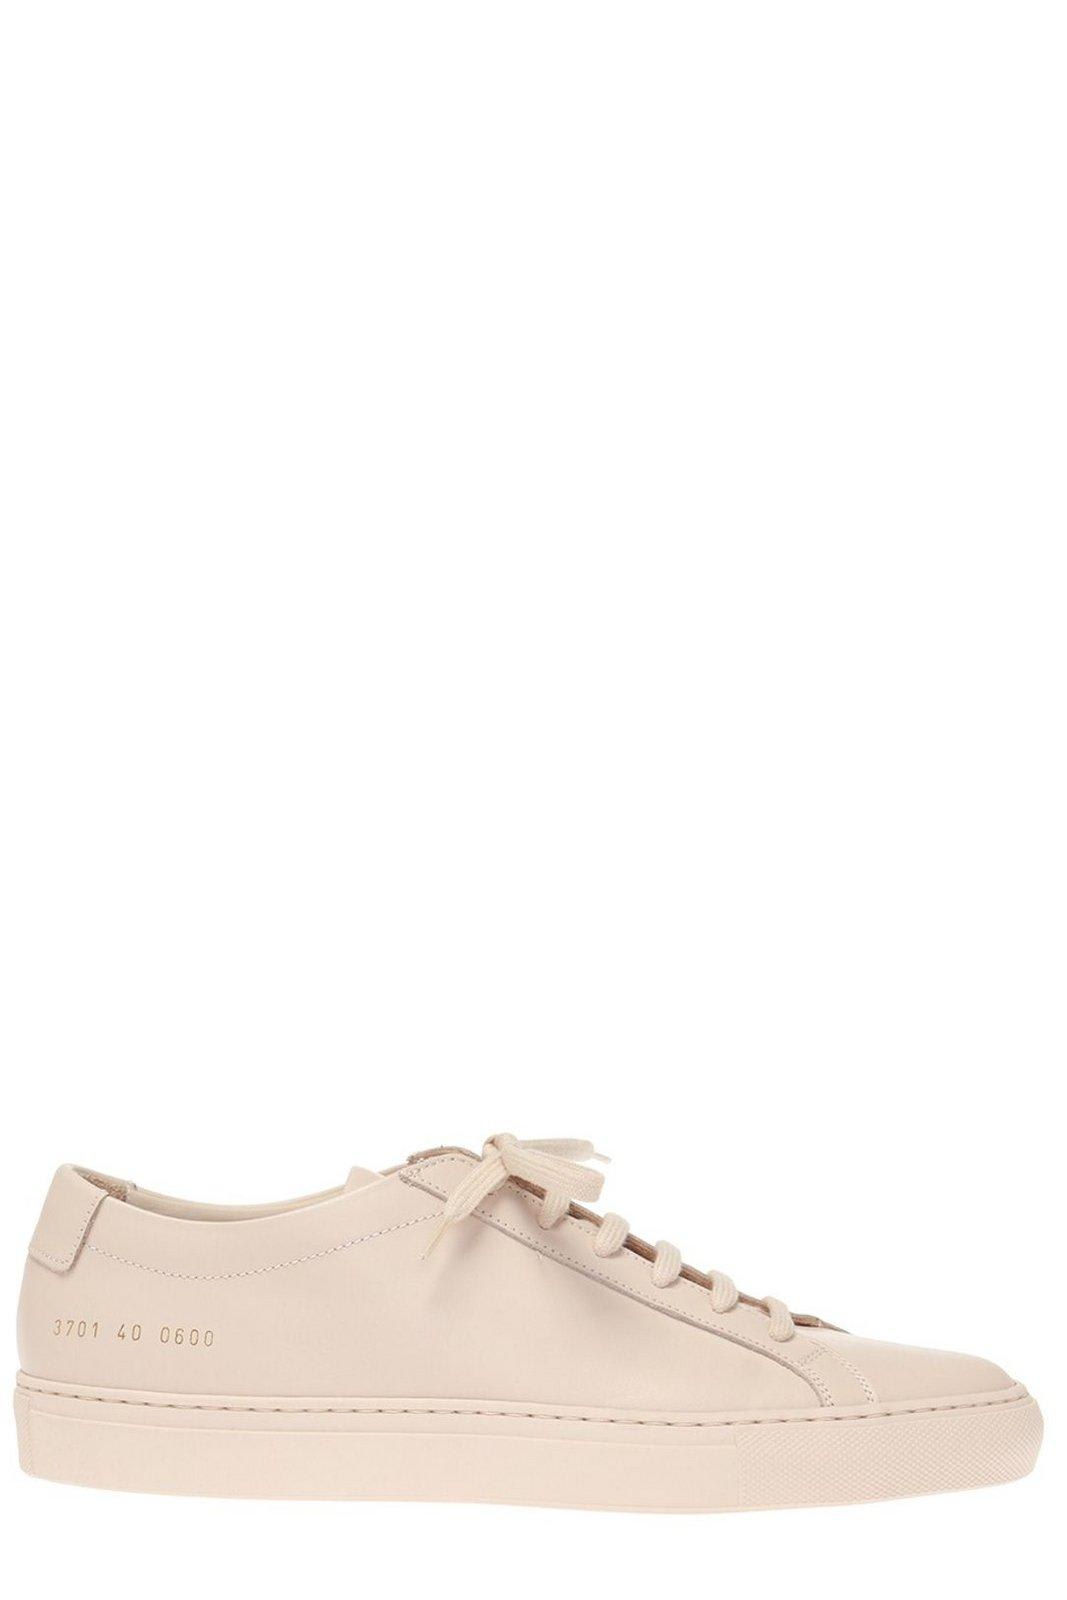 COMMON PROJECTS ORIGINAL ACHILLES SNEAKERS